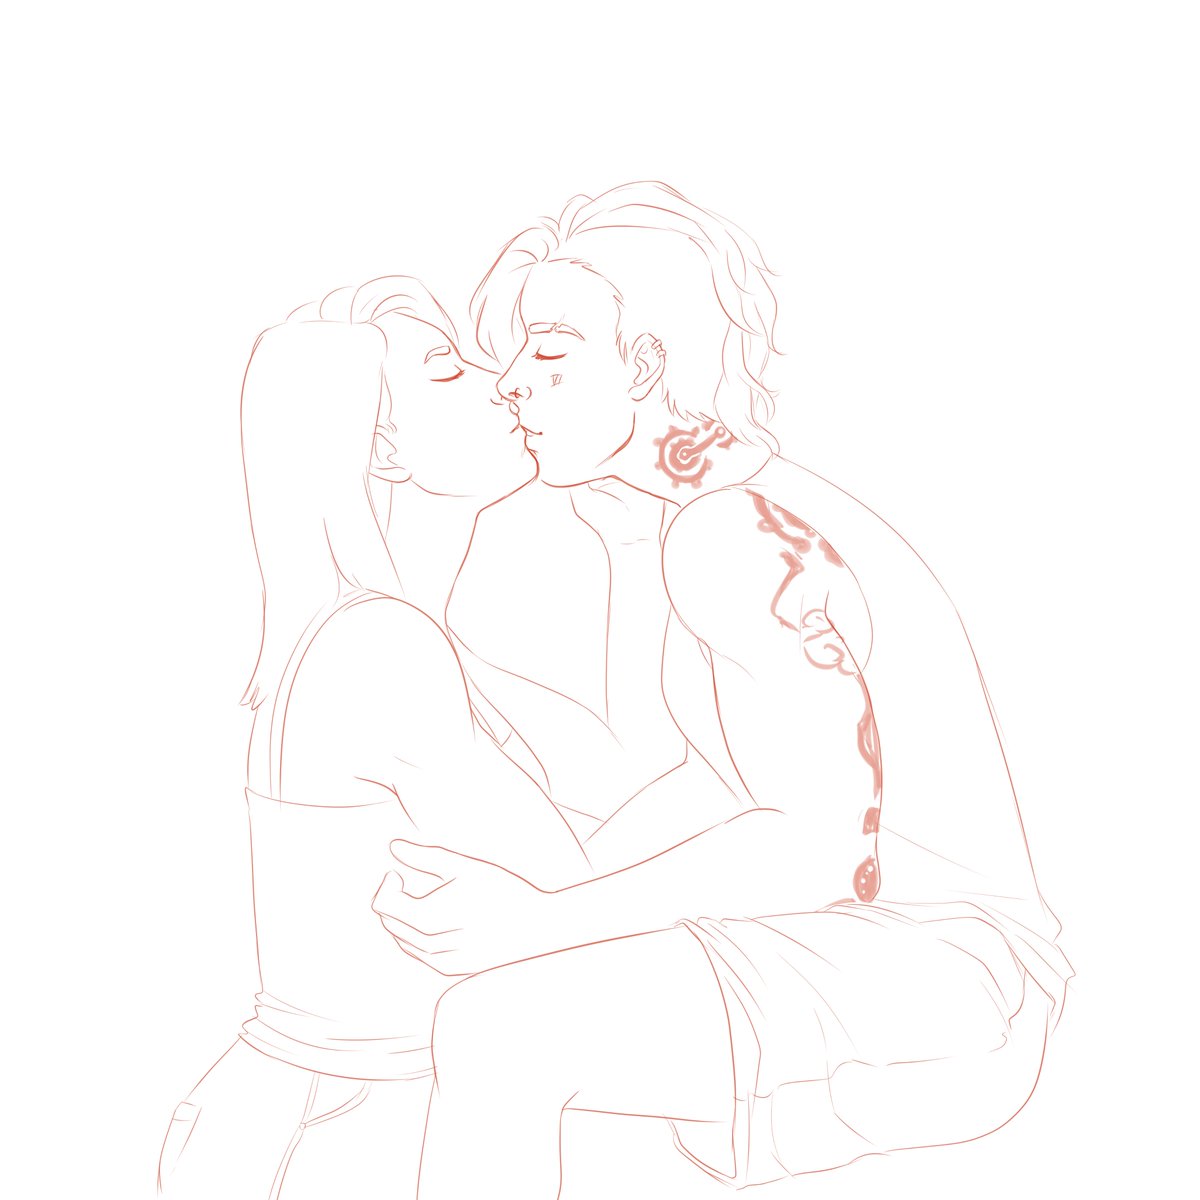 a wip
trying to get better at drawing kisses